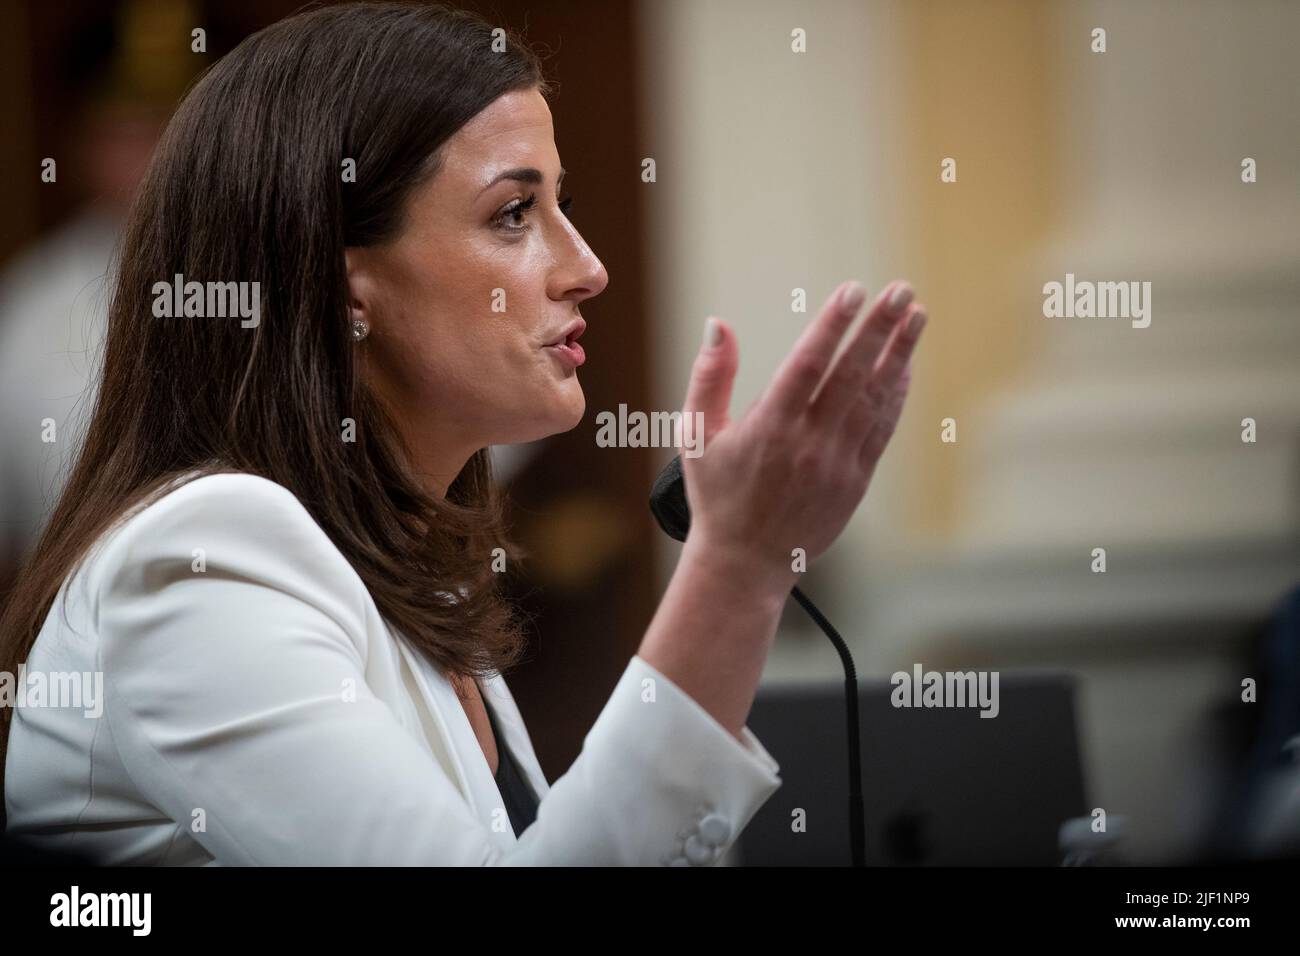 Washington, United States Of America. 28th June, 2022. Cassidy Hutchinson, an aide to former White House Chief of Staff Mark Meadows, responds to questions on day six of the United States House Select Committee to Investigate the January 6th Attack on the US Capitol hearing on Capitol Hill in Washington, DC on June 28, 2022. Credit: Rod Lamkey/CNP/Sipa USA Credit: Sipa USA/Alamy Live News Stock Photo